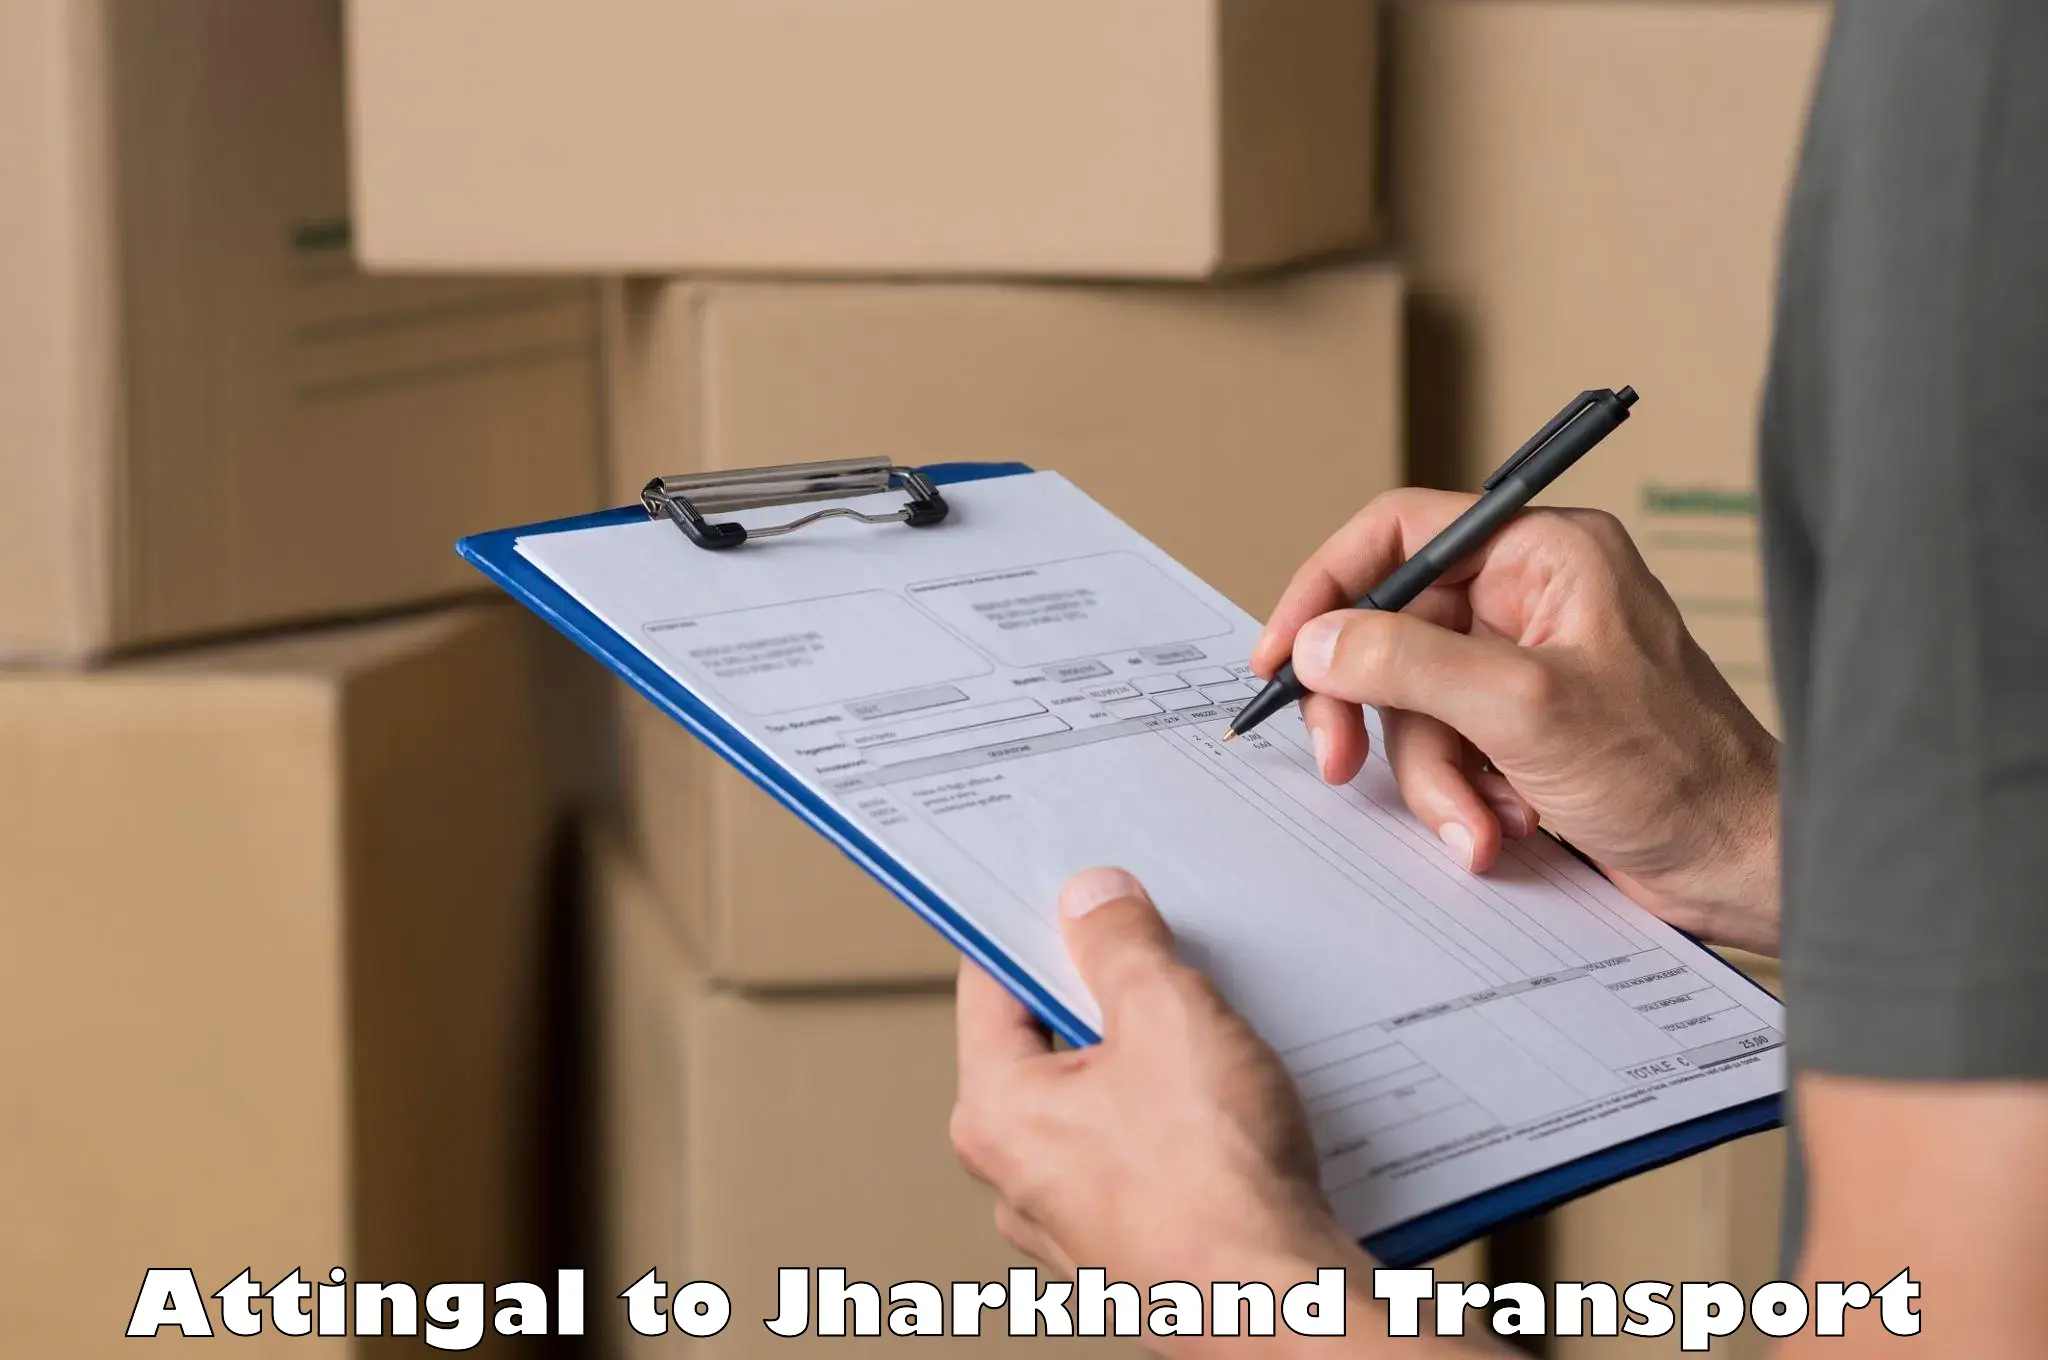 Online transport booking Attingal to Jharkhand